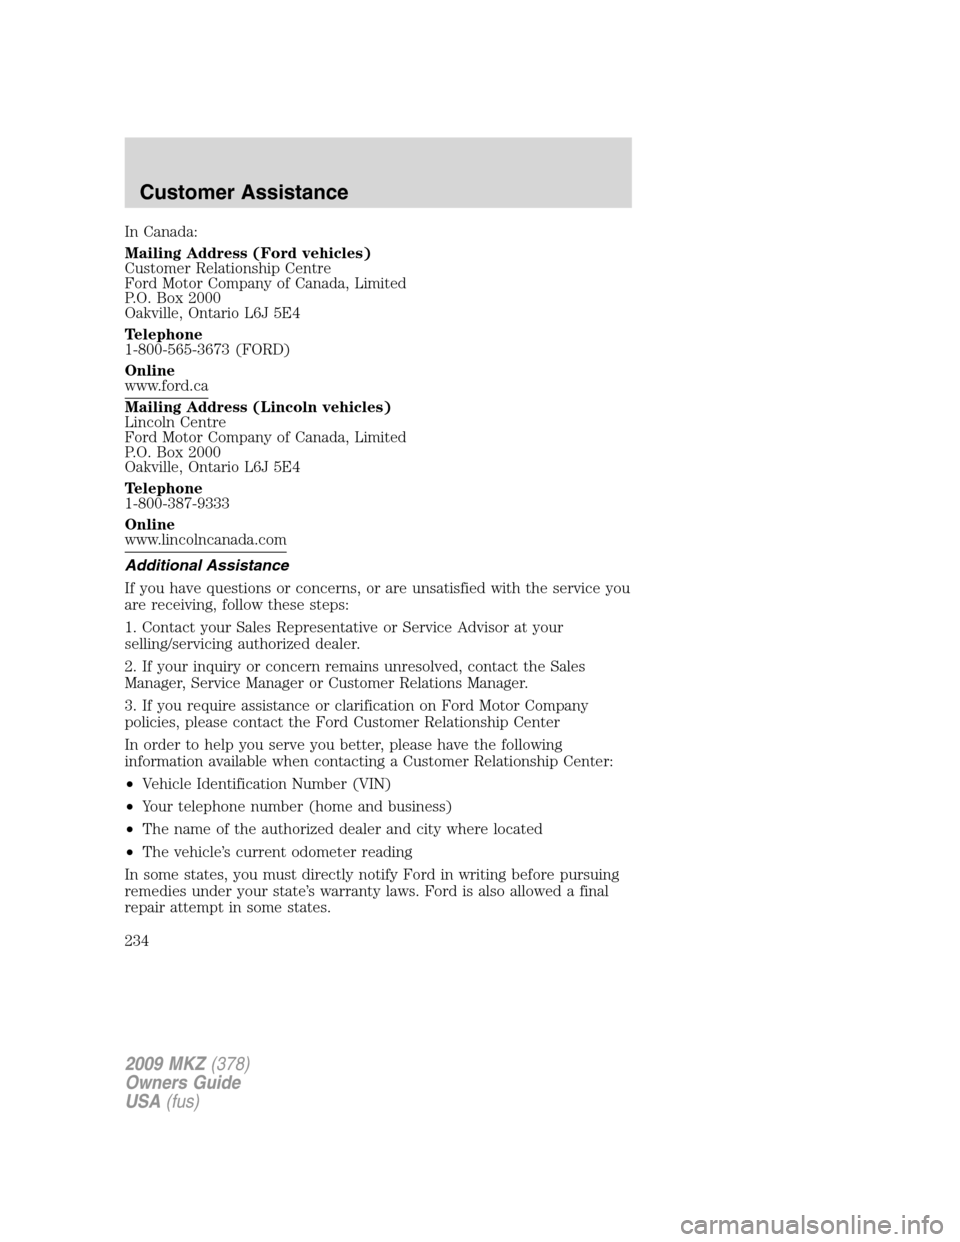 LINCOLN MKZ 2009  Owners Manual In Canada:
Mailing Address (Ford vehicles)
Customer Relationship Centre
Ford Motor Company of Canada, Limited
P.O. Box 2000
Oakville, Ontario L6J 5E4
Telephone
1-800-565-3673 (FORD)
Online
www.ford.ca